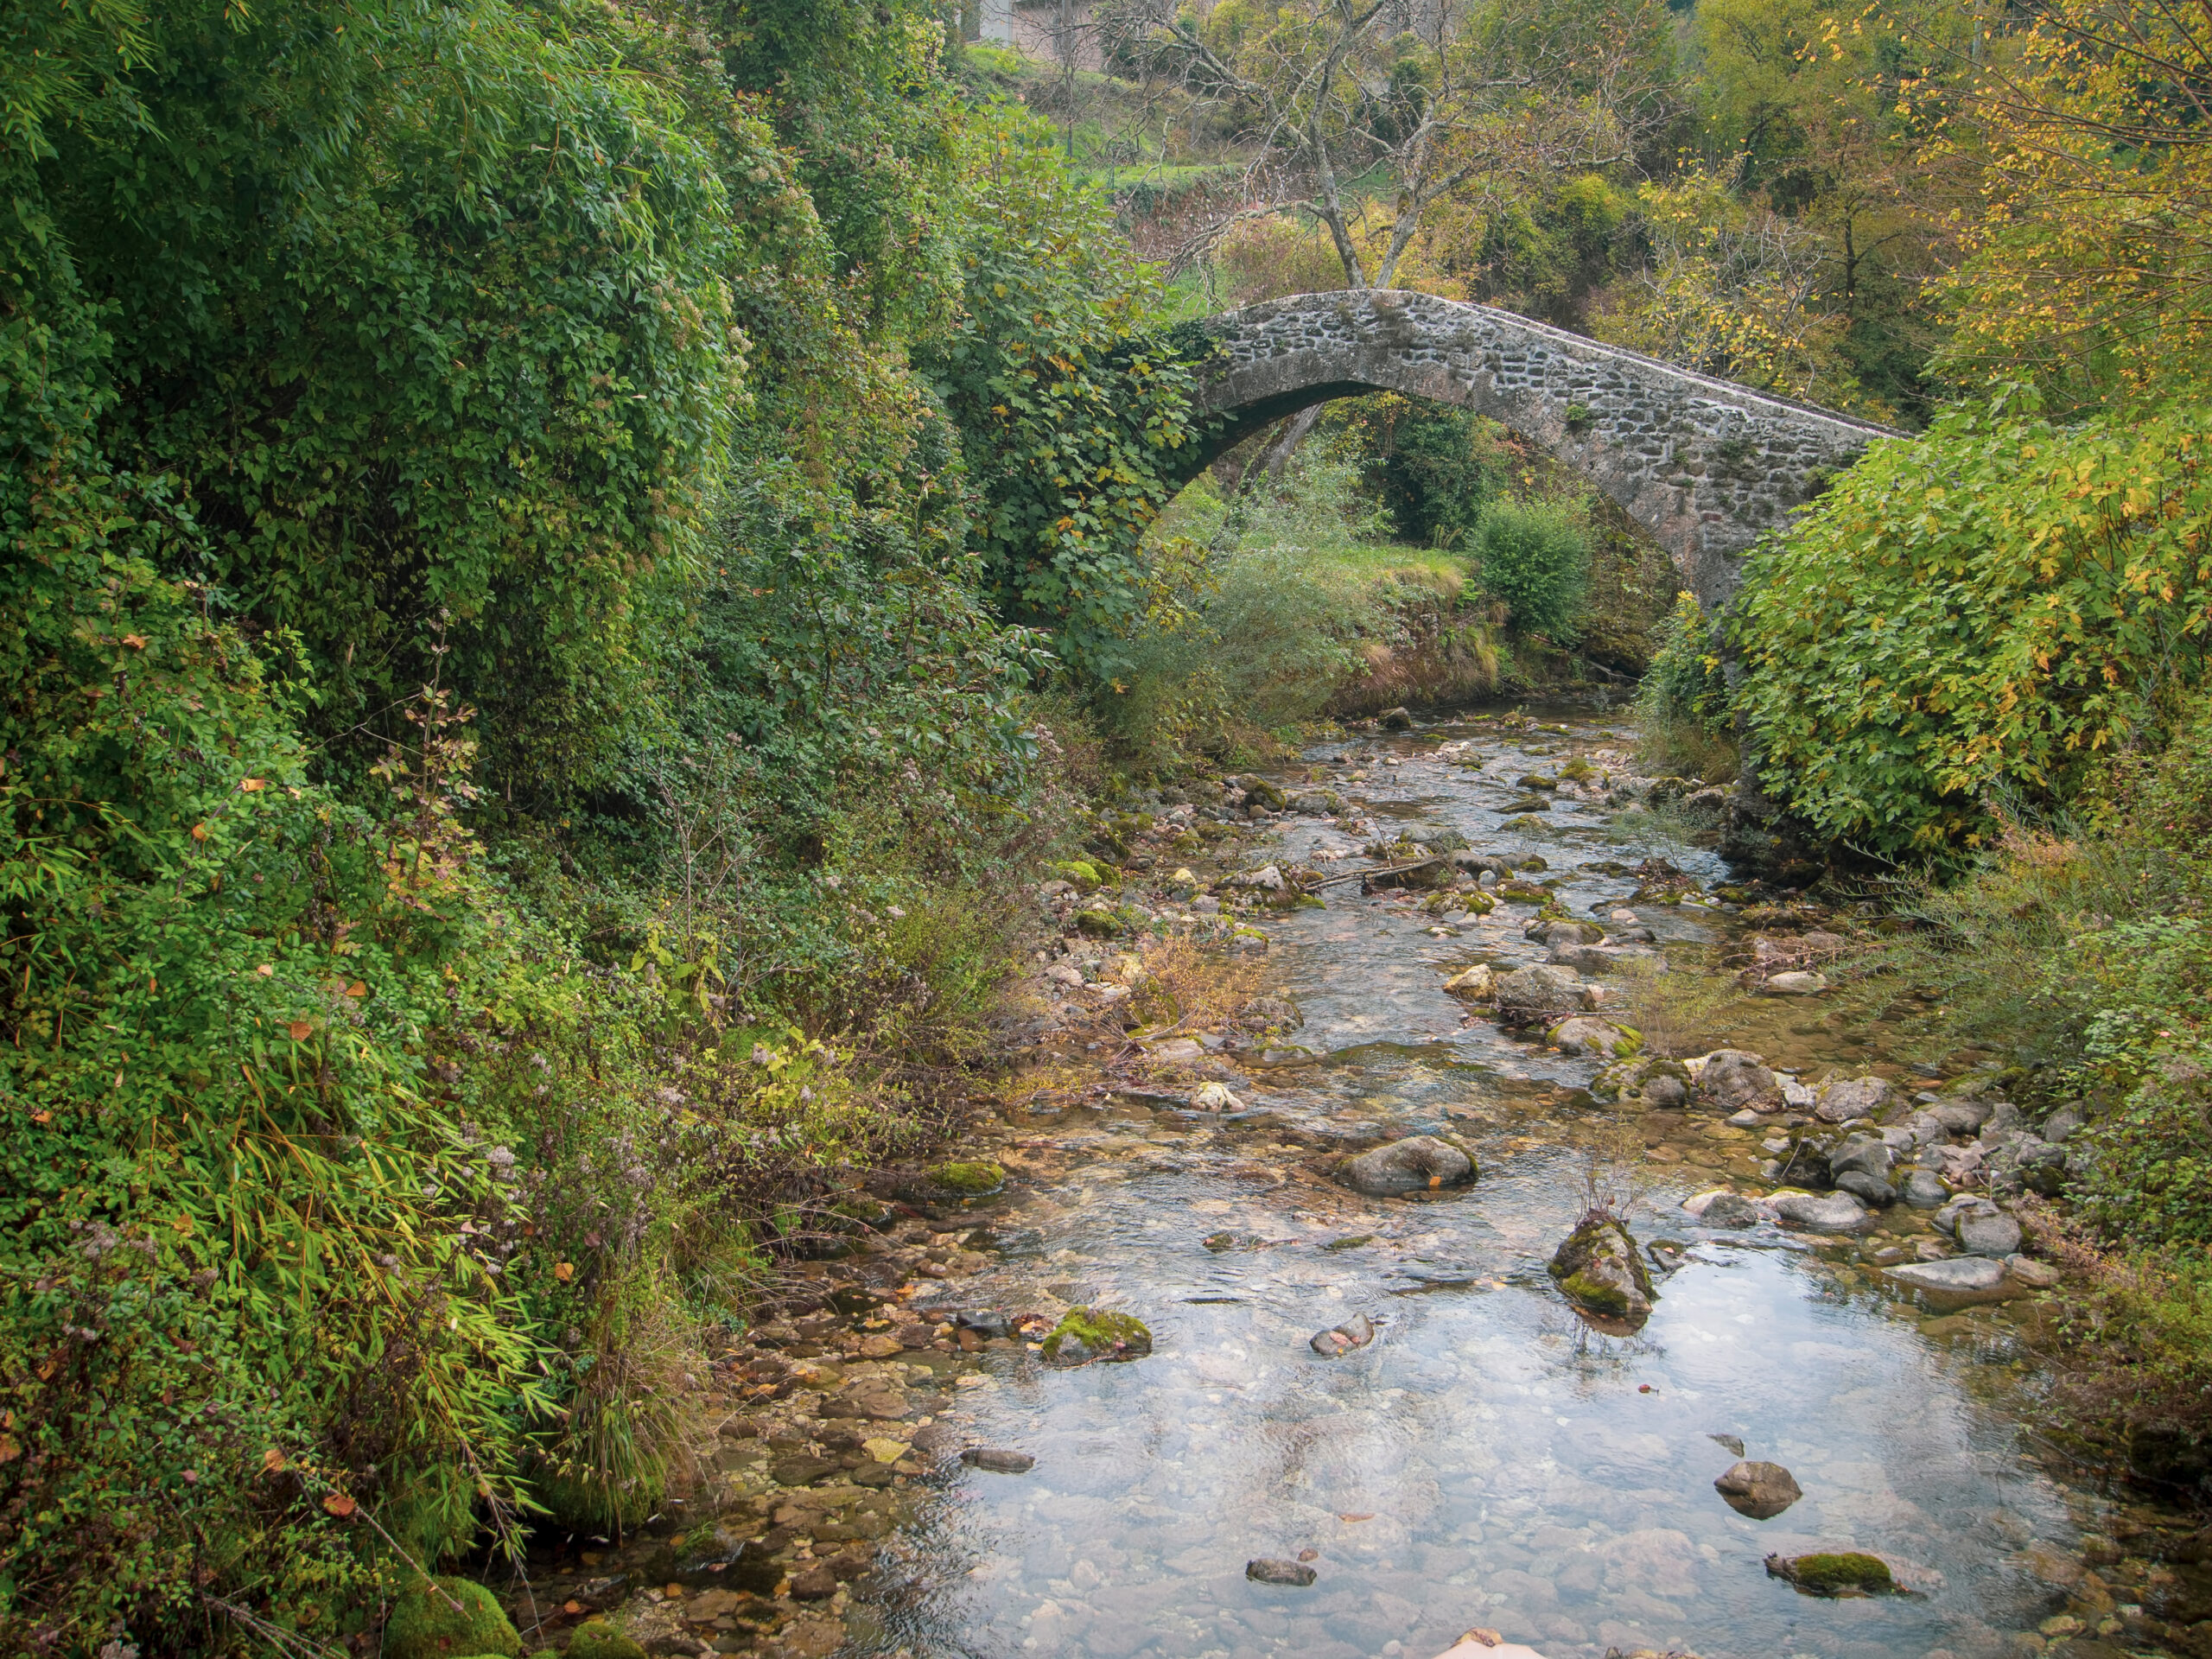 View of a beautiful ancient arched bridge over Catenelle Stream near the Bozzeti Thermal Baths in the fall foliage 